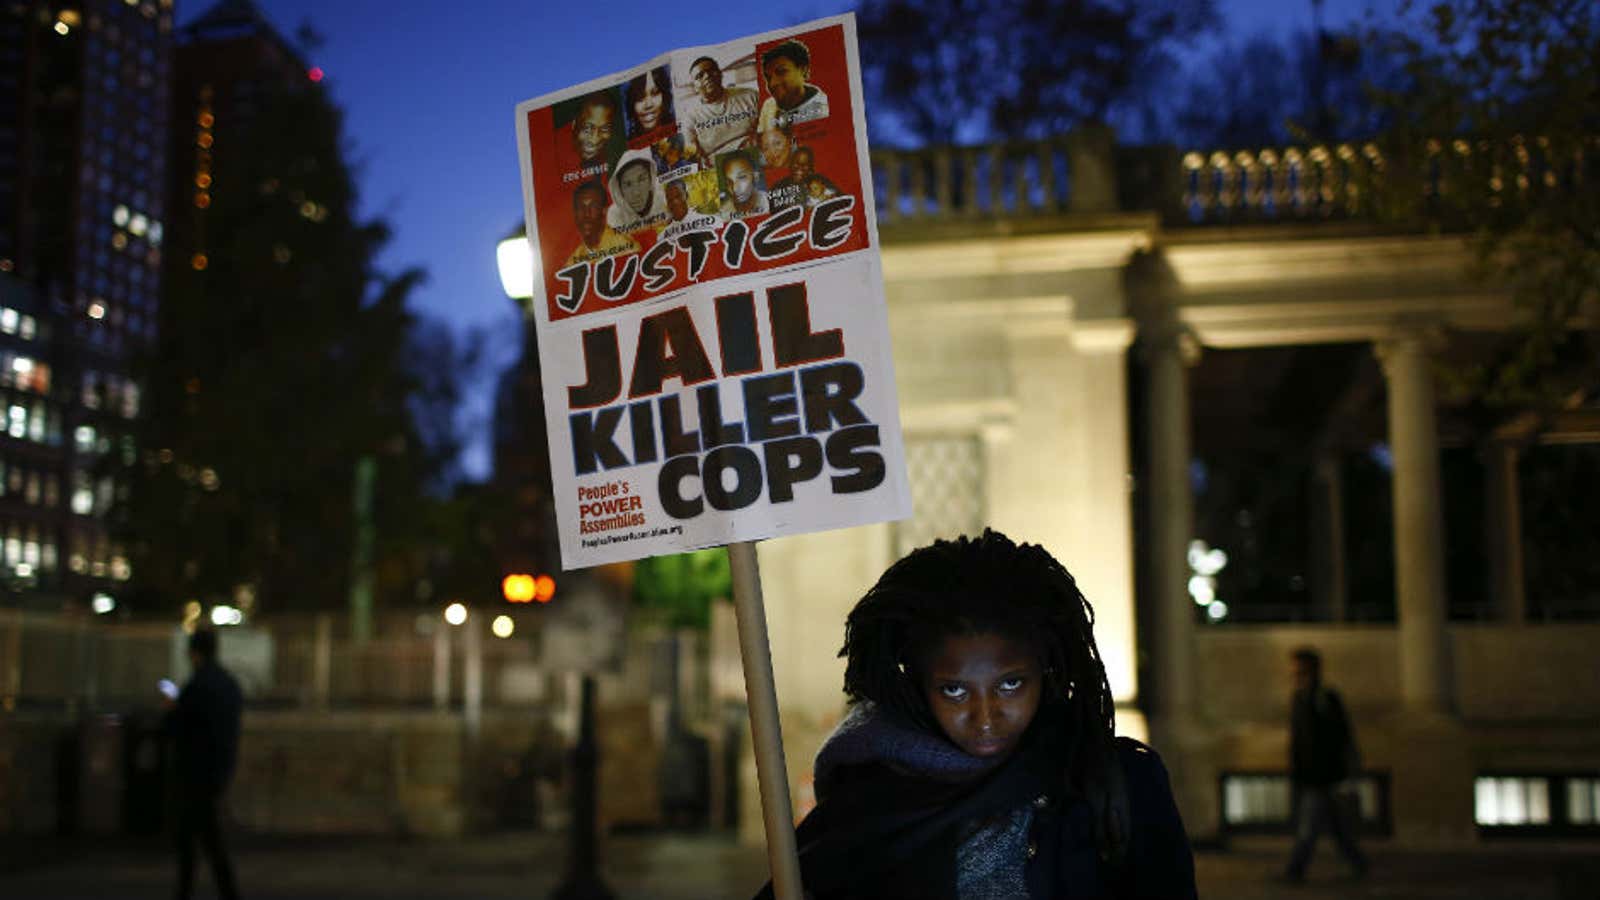 Grand juries in two recent cases decided not to indict police officers who shot unarmed civilians.